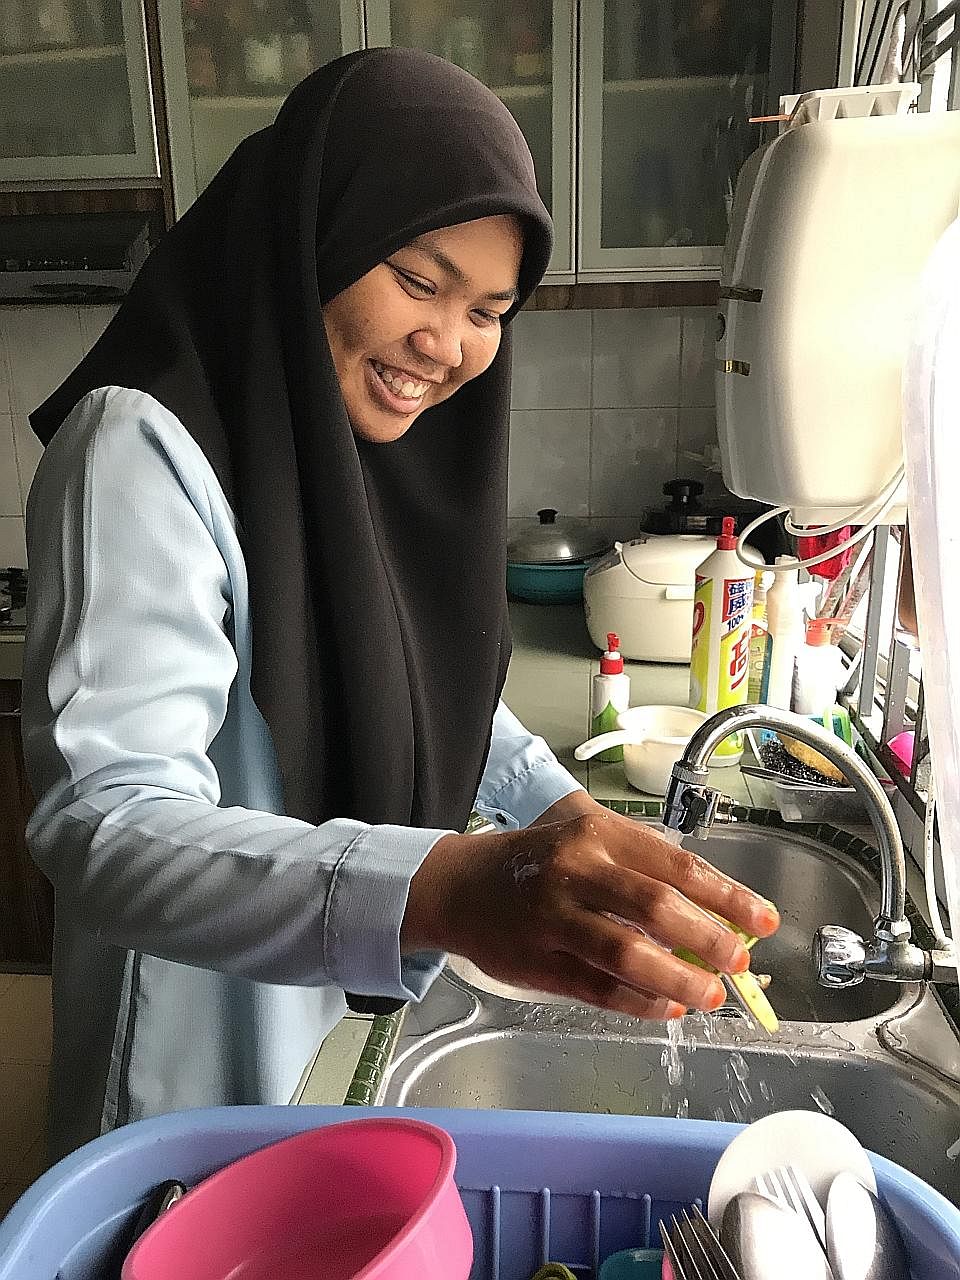 Ever since she started work two months ago, Ms Nor Asma has formed a strong bond with her employer's kids, especially Ahmad Willdan Arjuna Ahmad Fedtri, three. Ms Nor Asma Arifin, who was initially apprehensive about living with strangers, has adjust